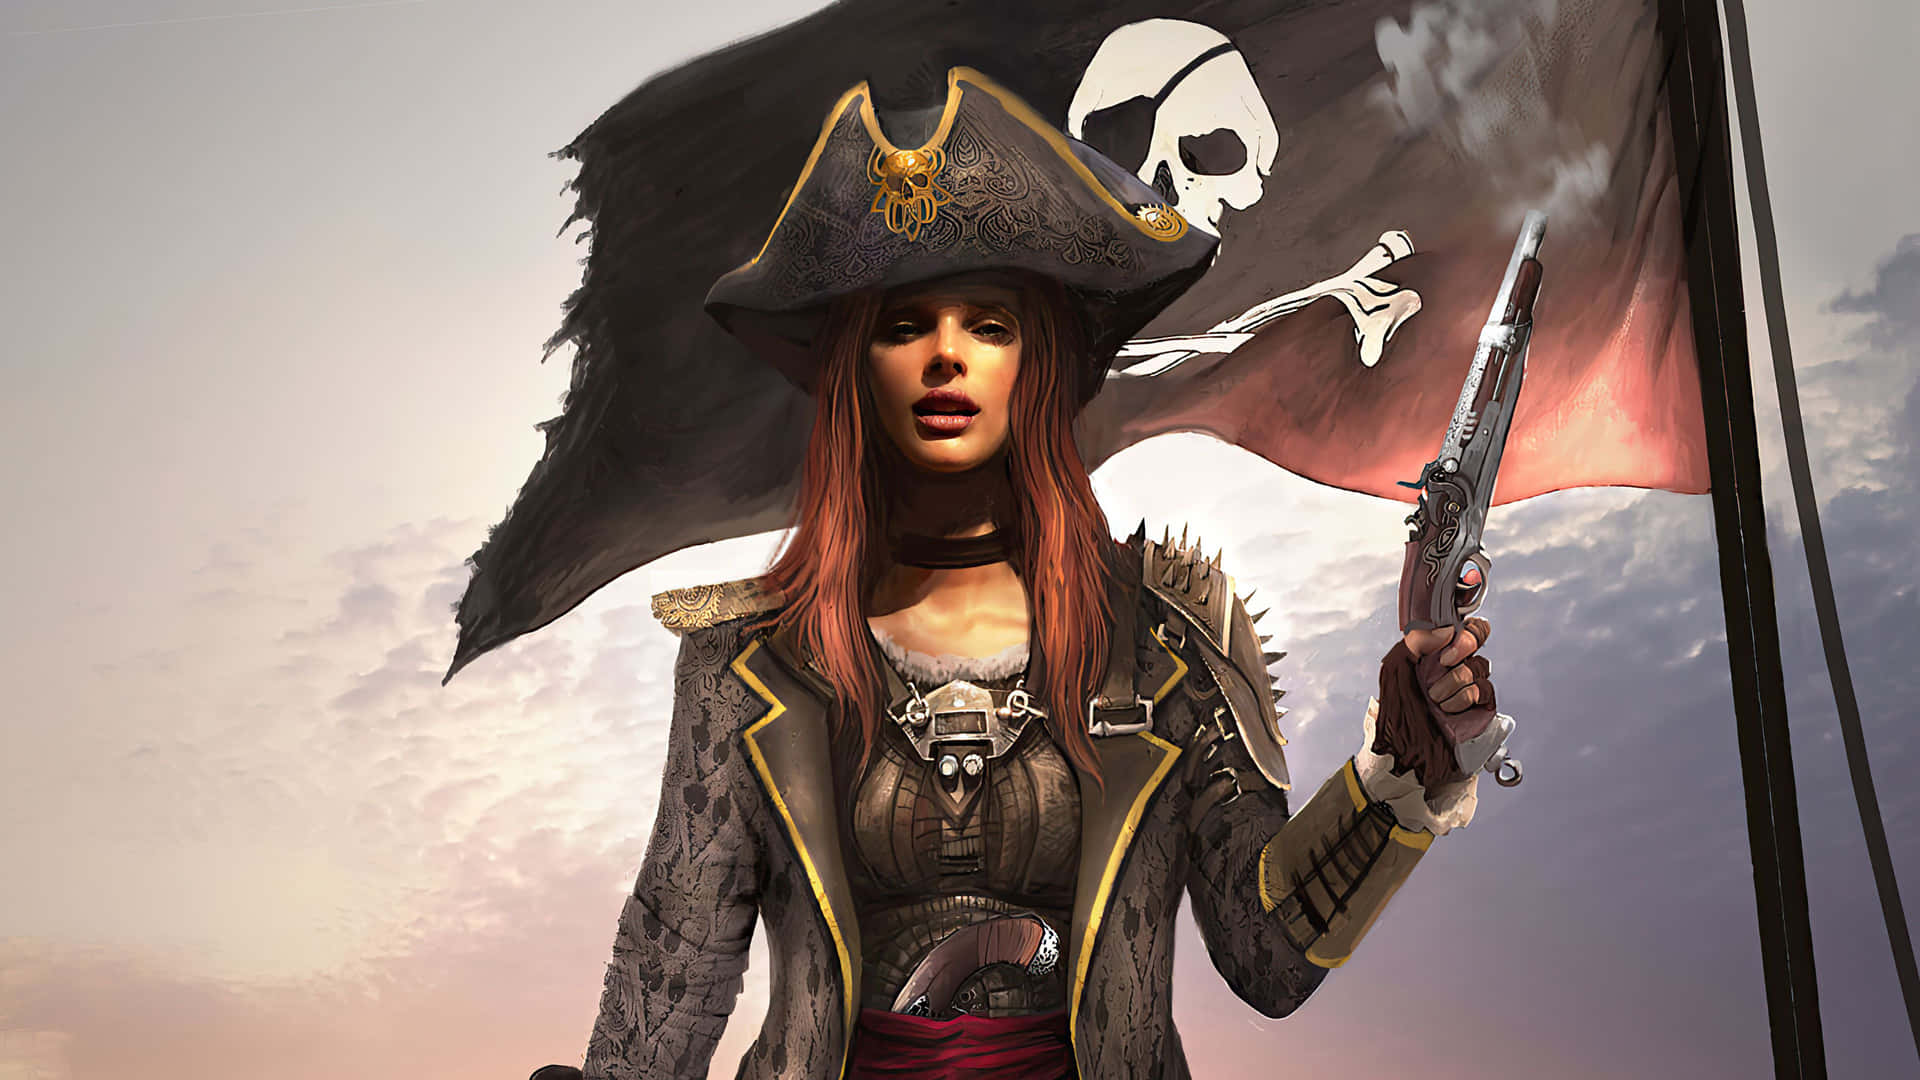 No treasure is safe with this wicked pirate on the prowl